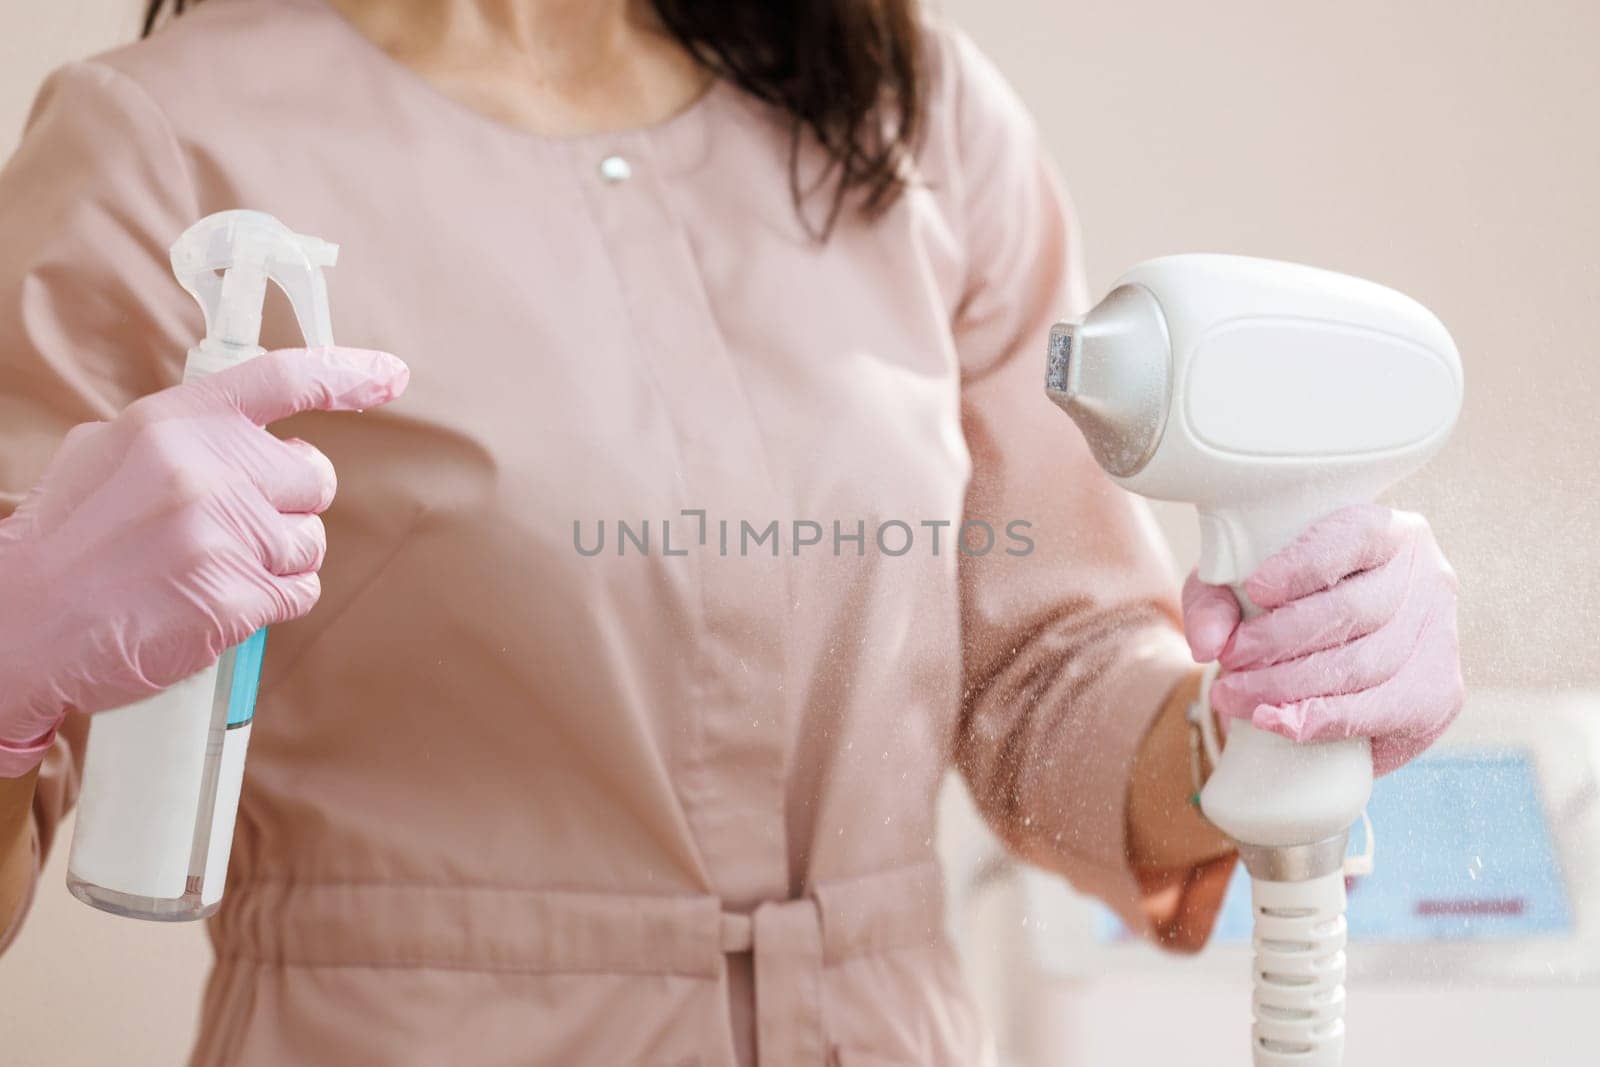 Beautician treats her equipment with an antiseptic. Close up of female beautician in sterile gloves using diode laser hair removal machine. Esthetician preparing equipment for epilation procedure.